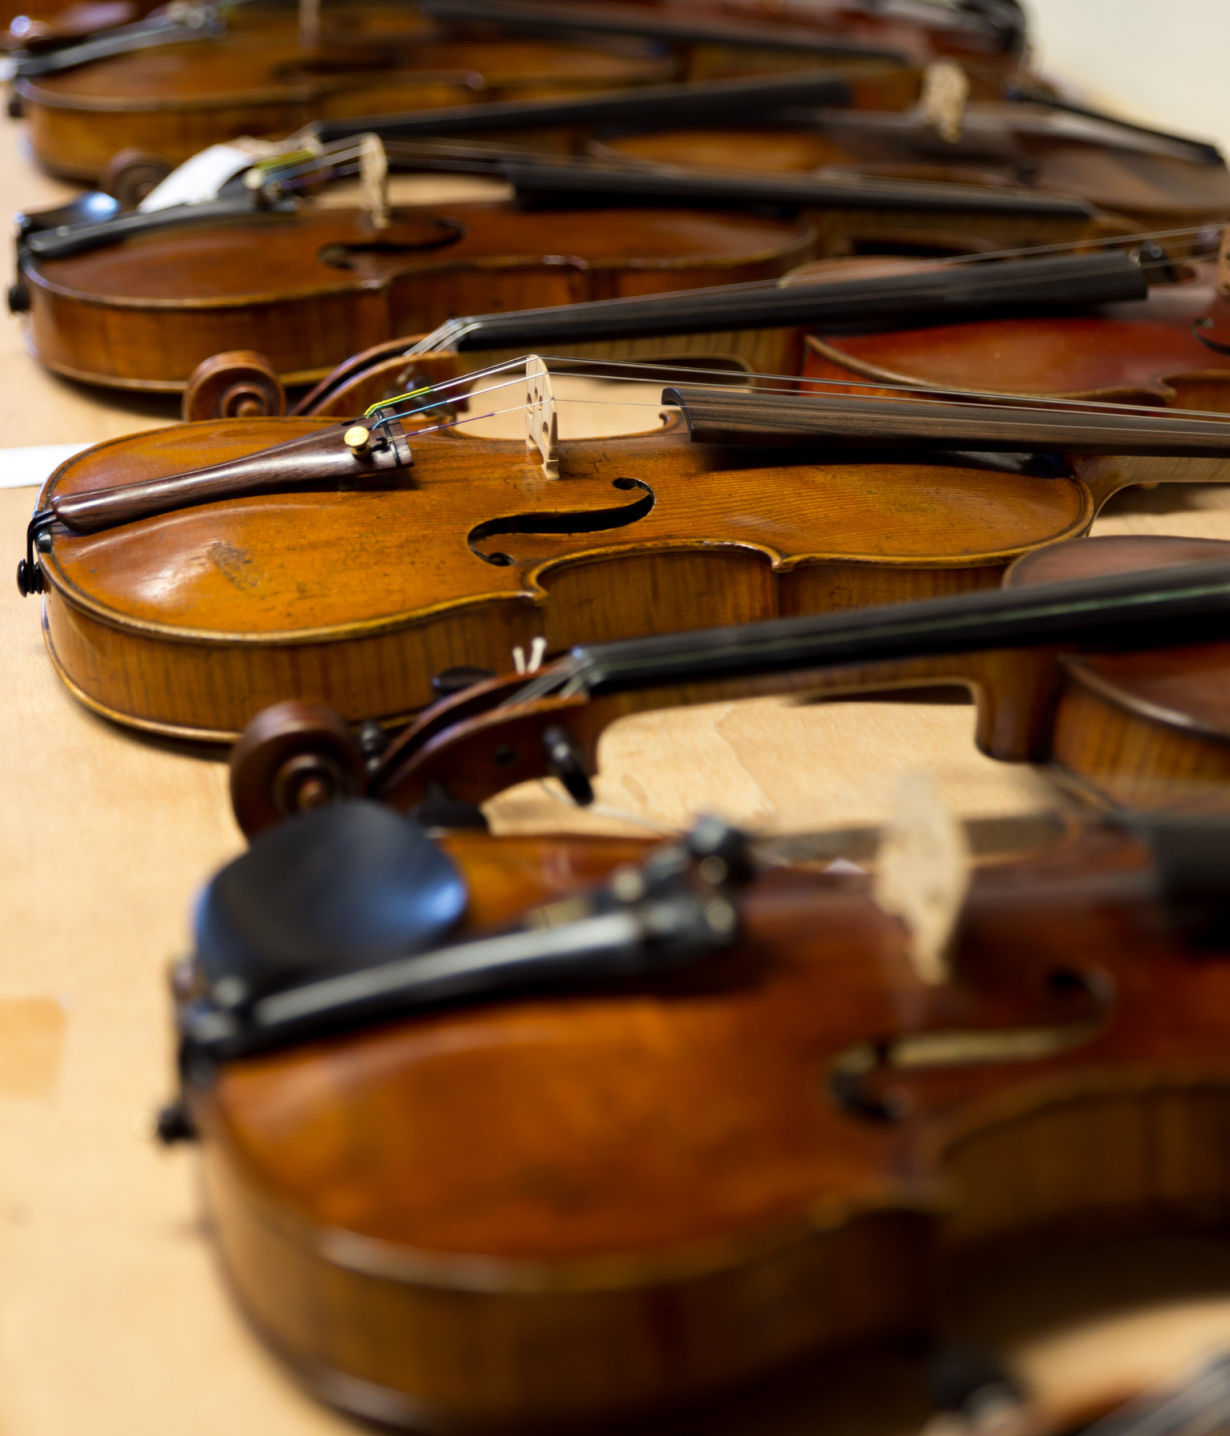 The perfect place to pick up a good quality violin for daily use, a child’s first instrument or a cello to restore, spare fingerboards, chin rests, pegs and tools.